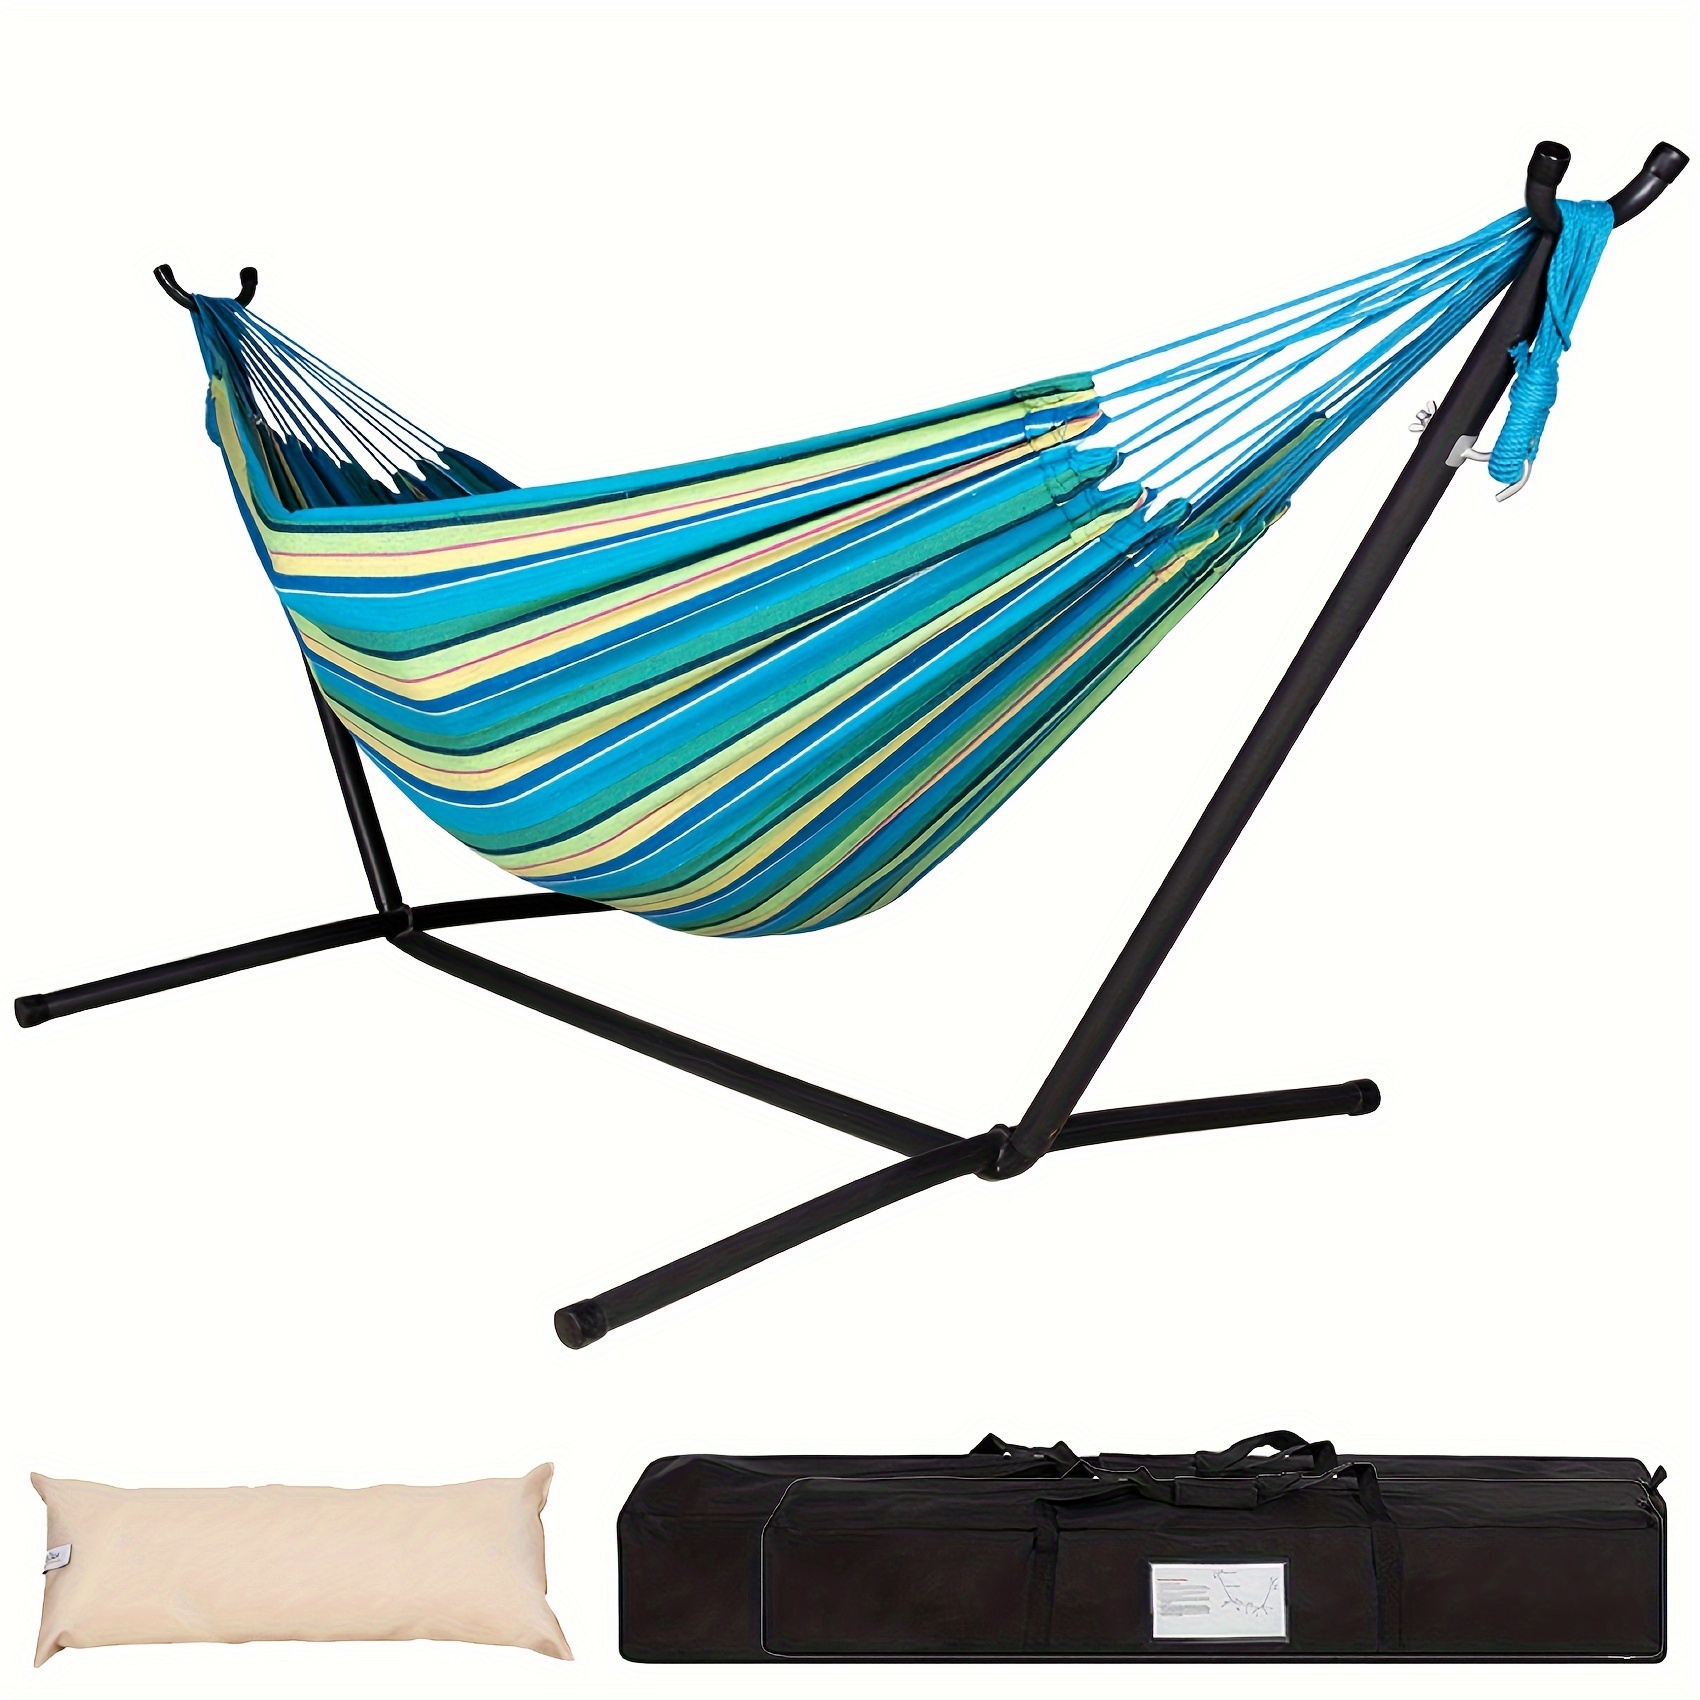 

Double Hammock With Space Saving Steel Stand Includes Portable Carrying Case And Head Pillow, 450 Pounds Capacity